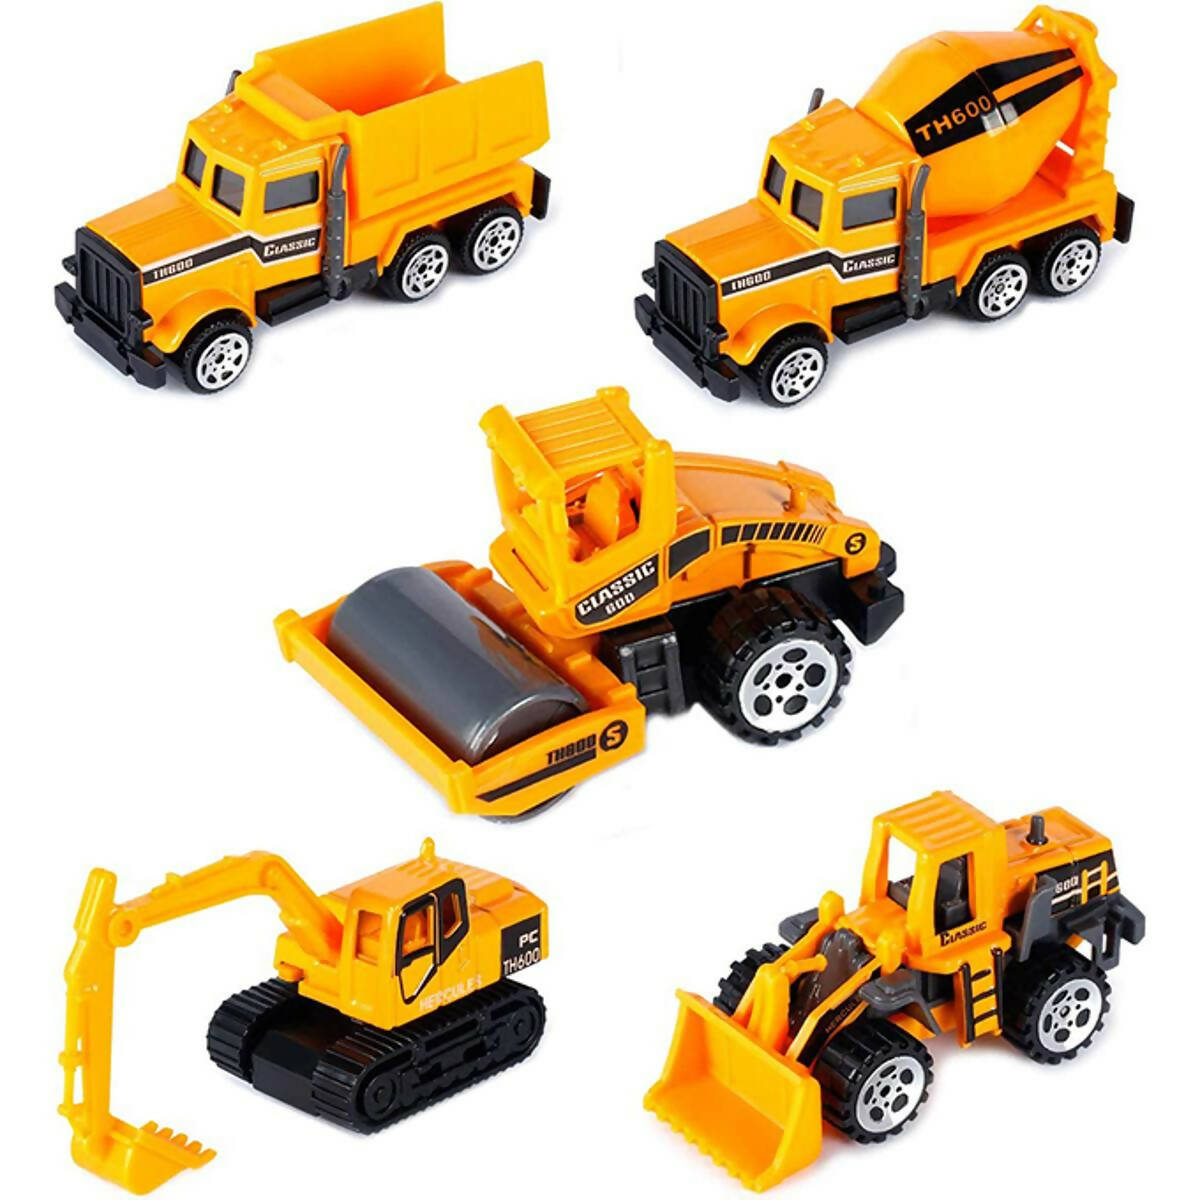 Pack Of 5 Models Construction Trucks For 3 Year Old Boys Mini Engineering Models Play Vehicles Cars